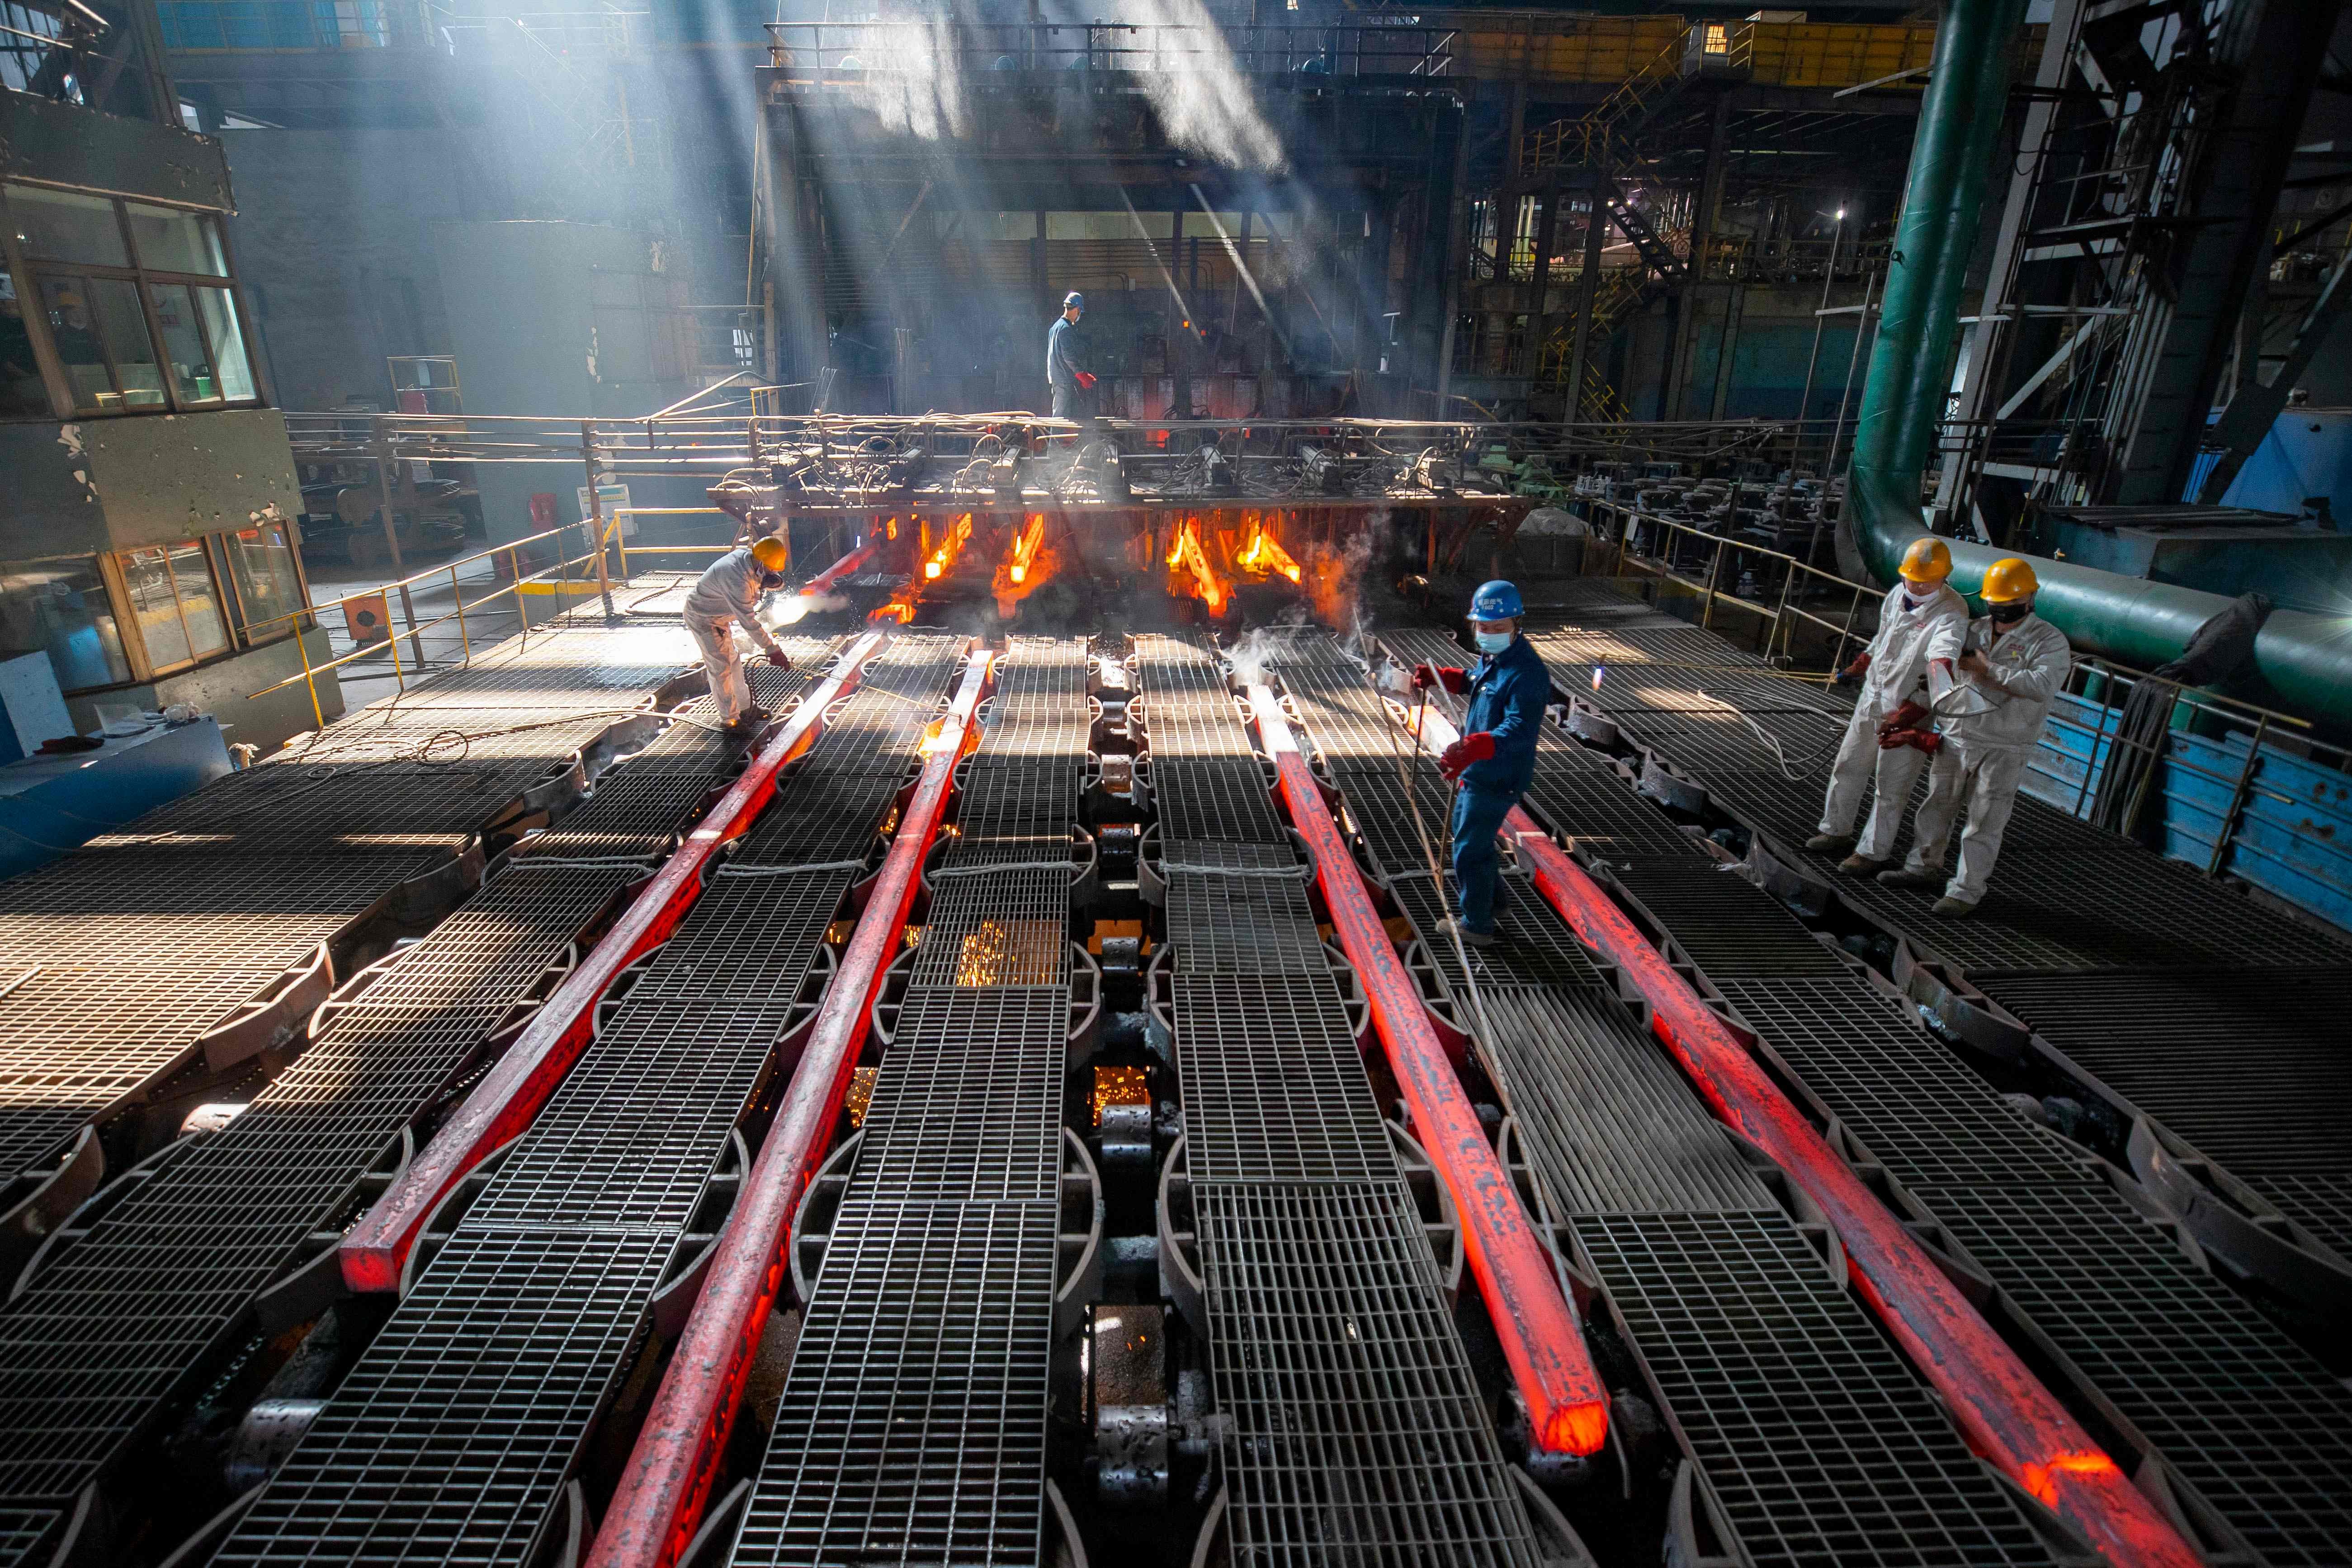 BHP and Tata Steel reinforce commitment to decarbonise steelmaking